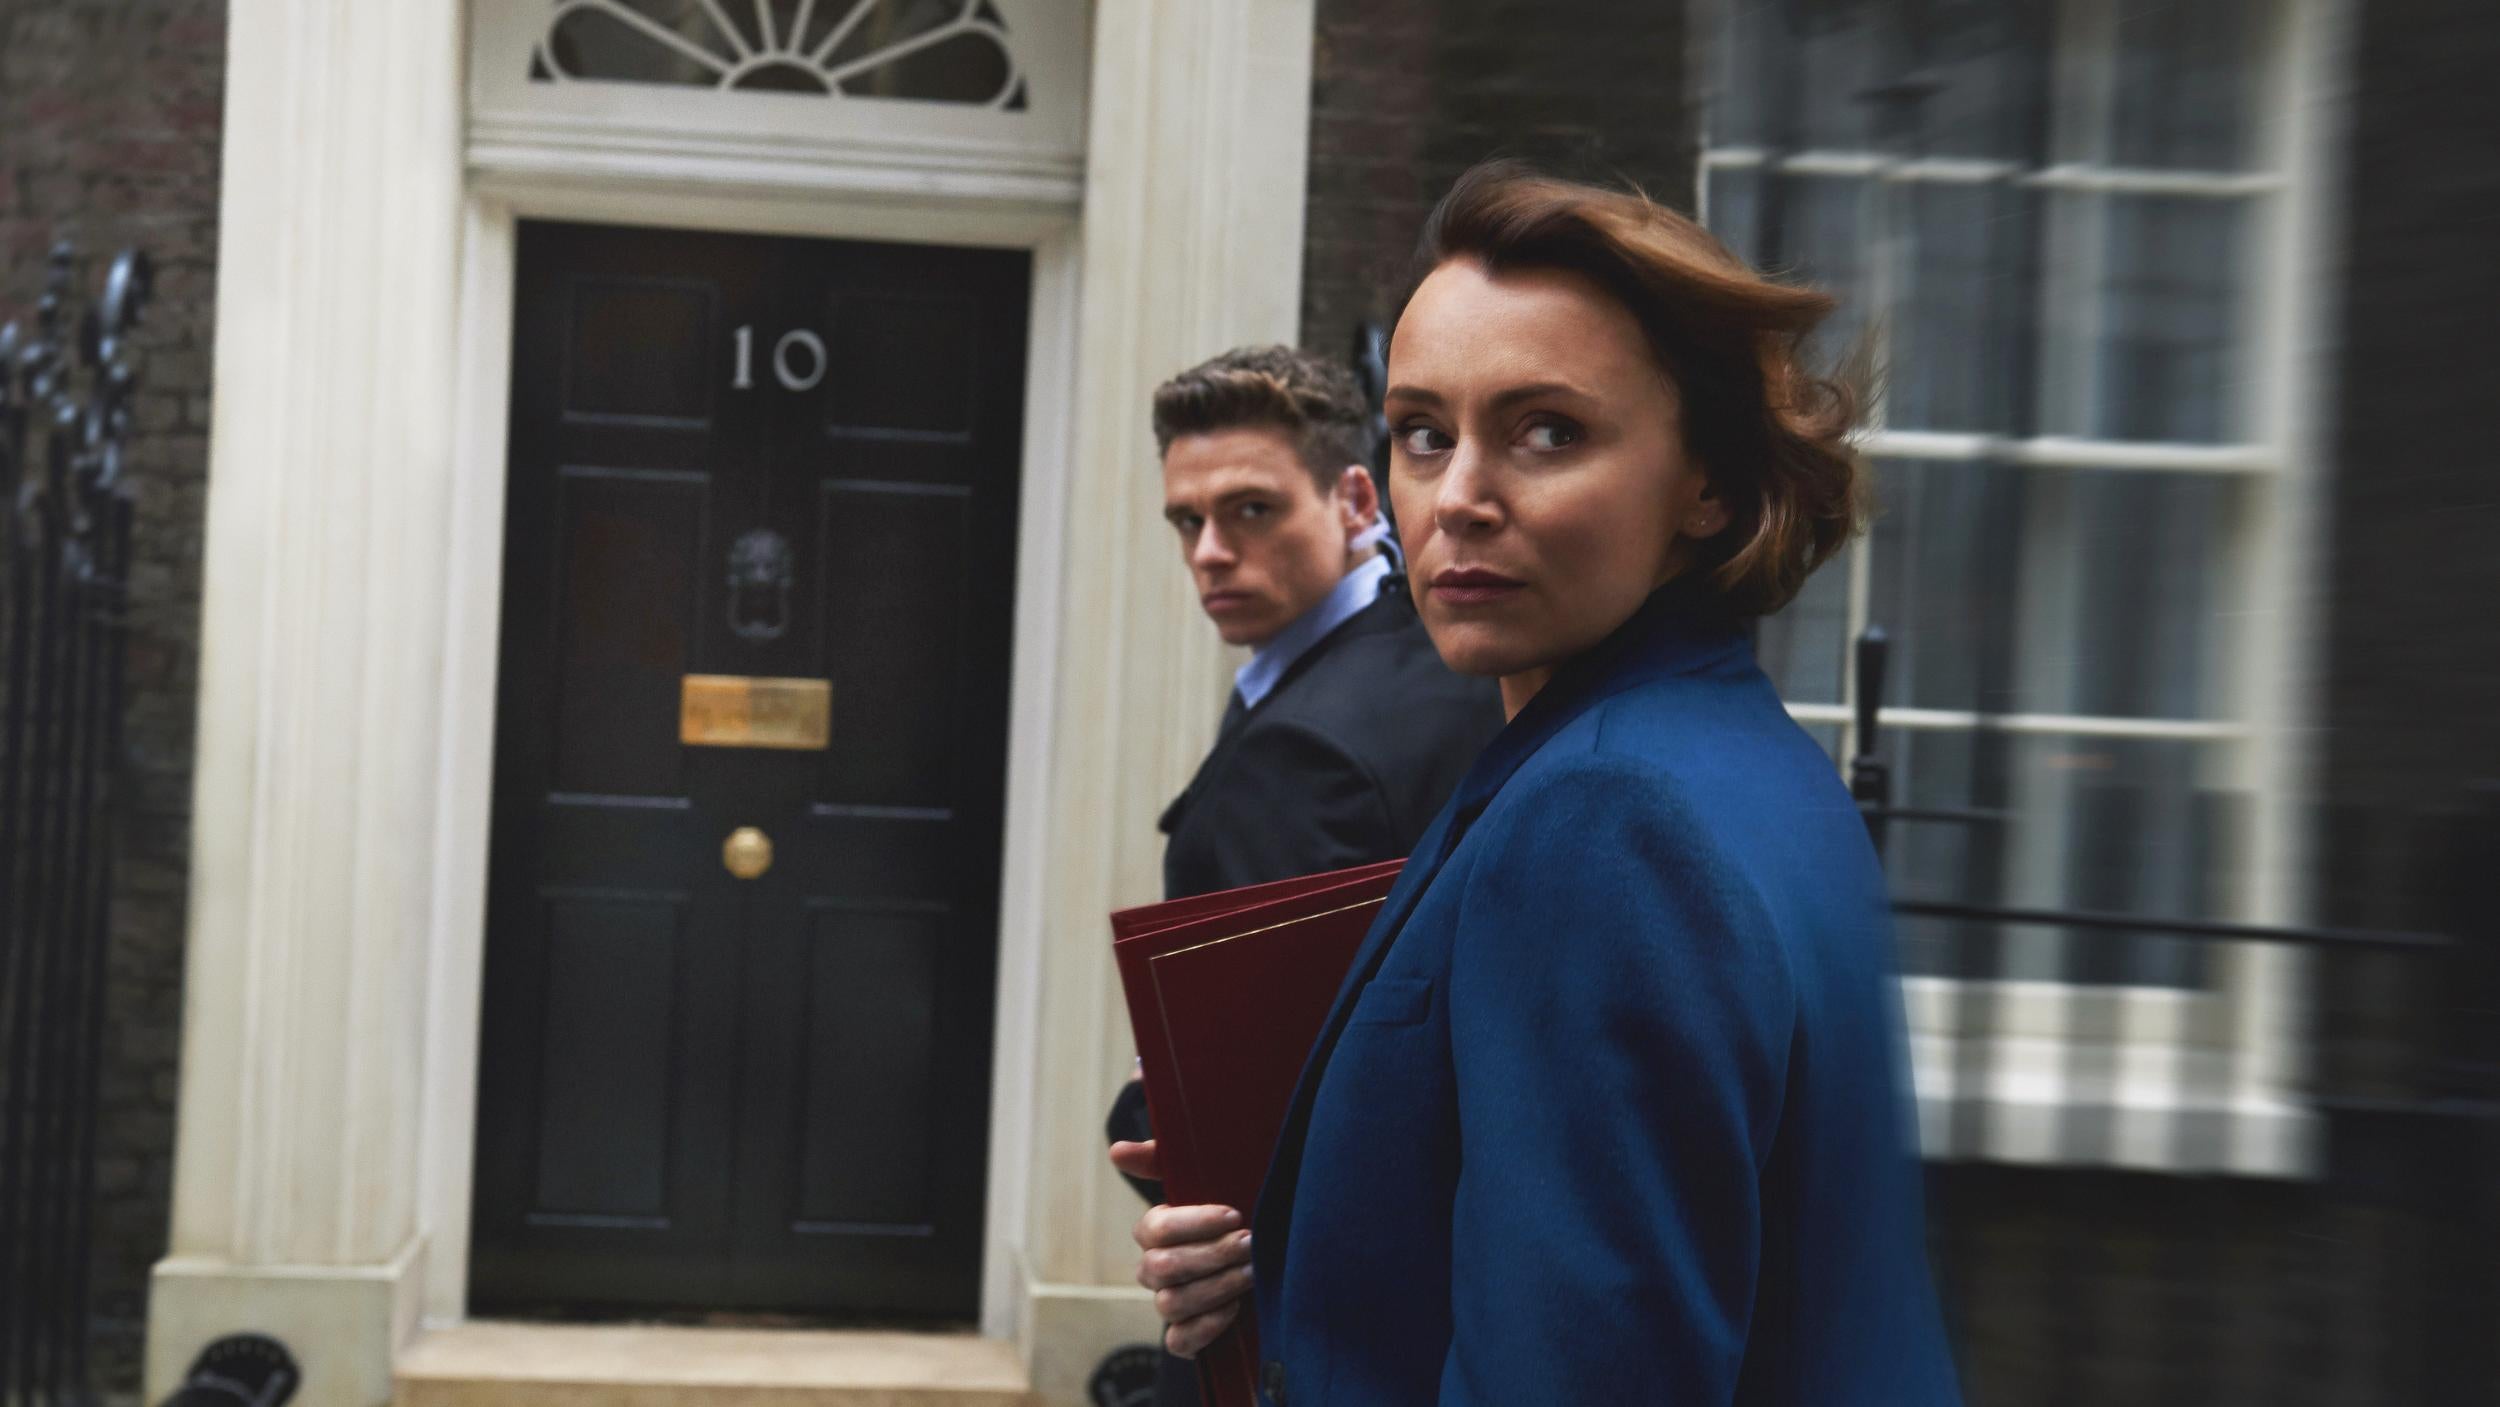 Promising start: Keeley Hawes and Richard Madden in the ‘Bodyguard’